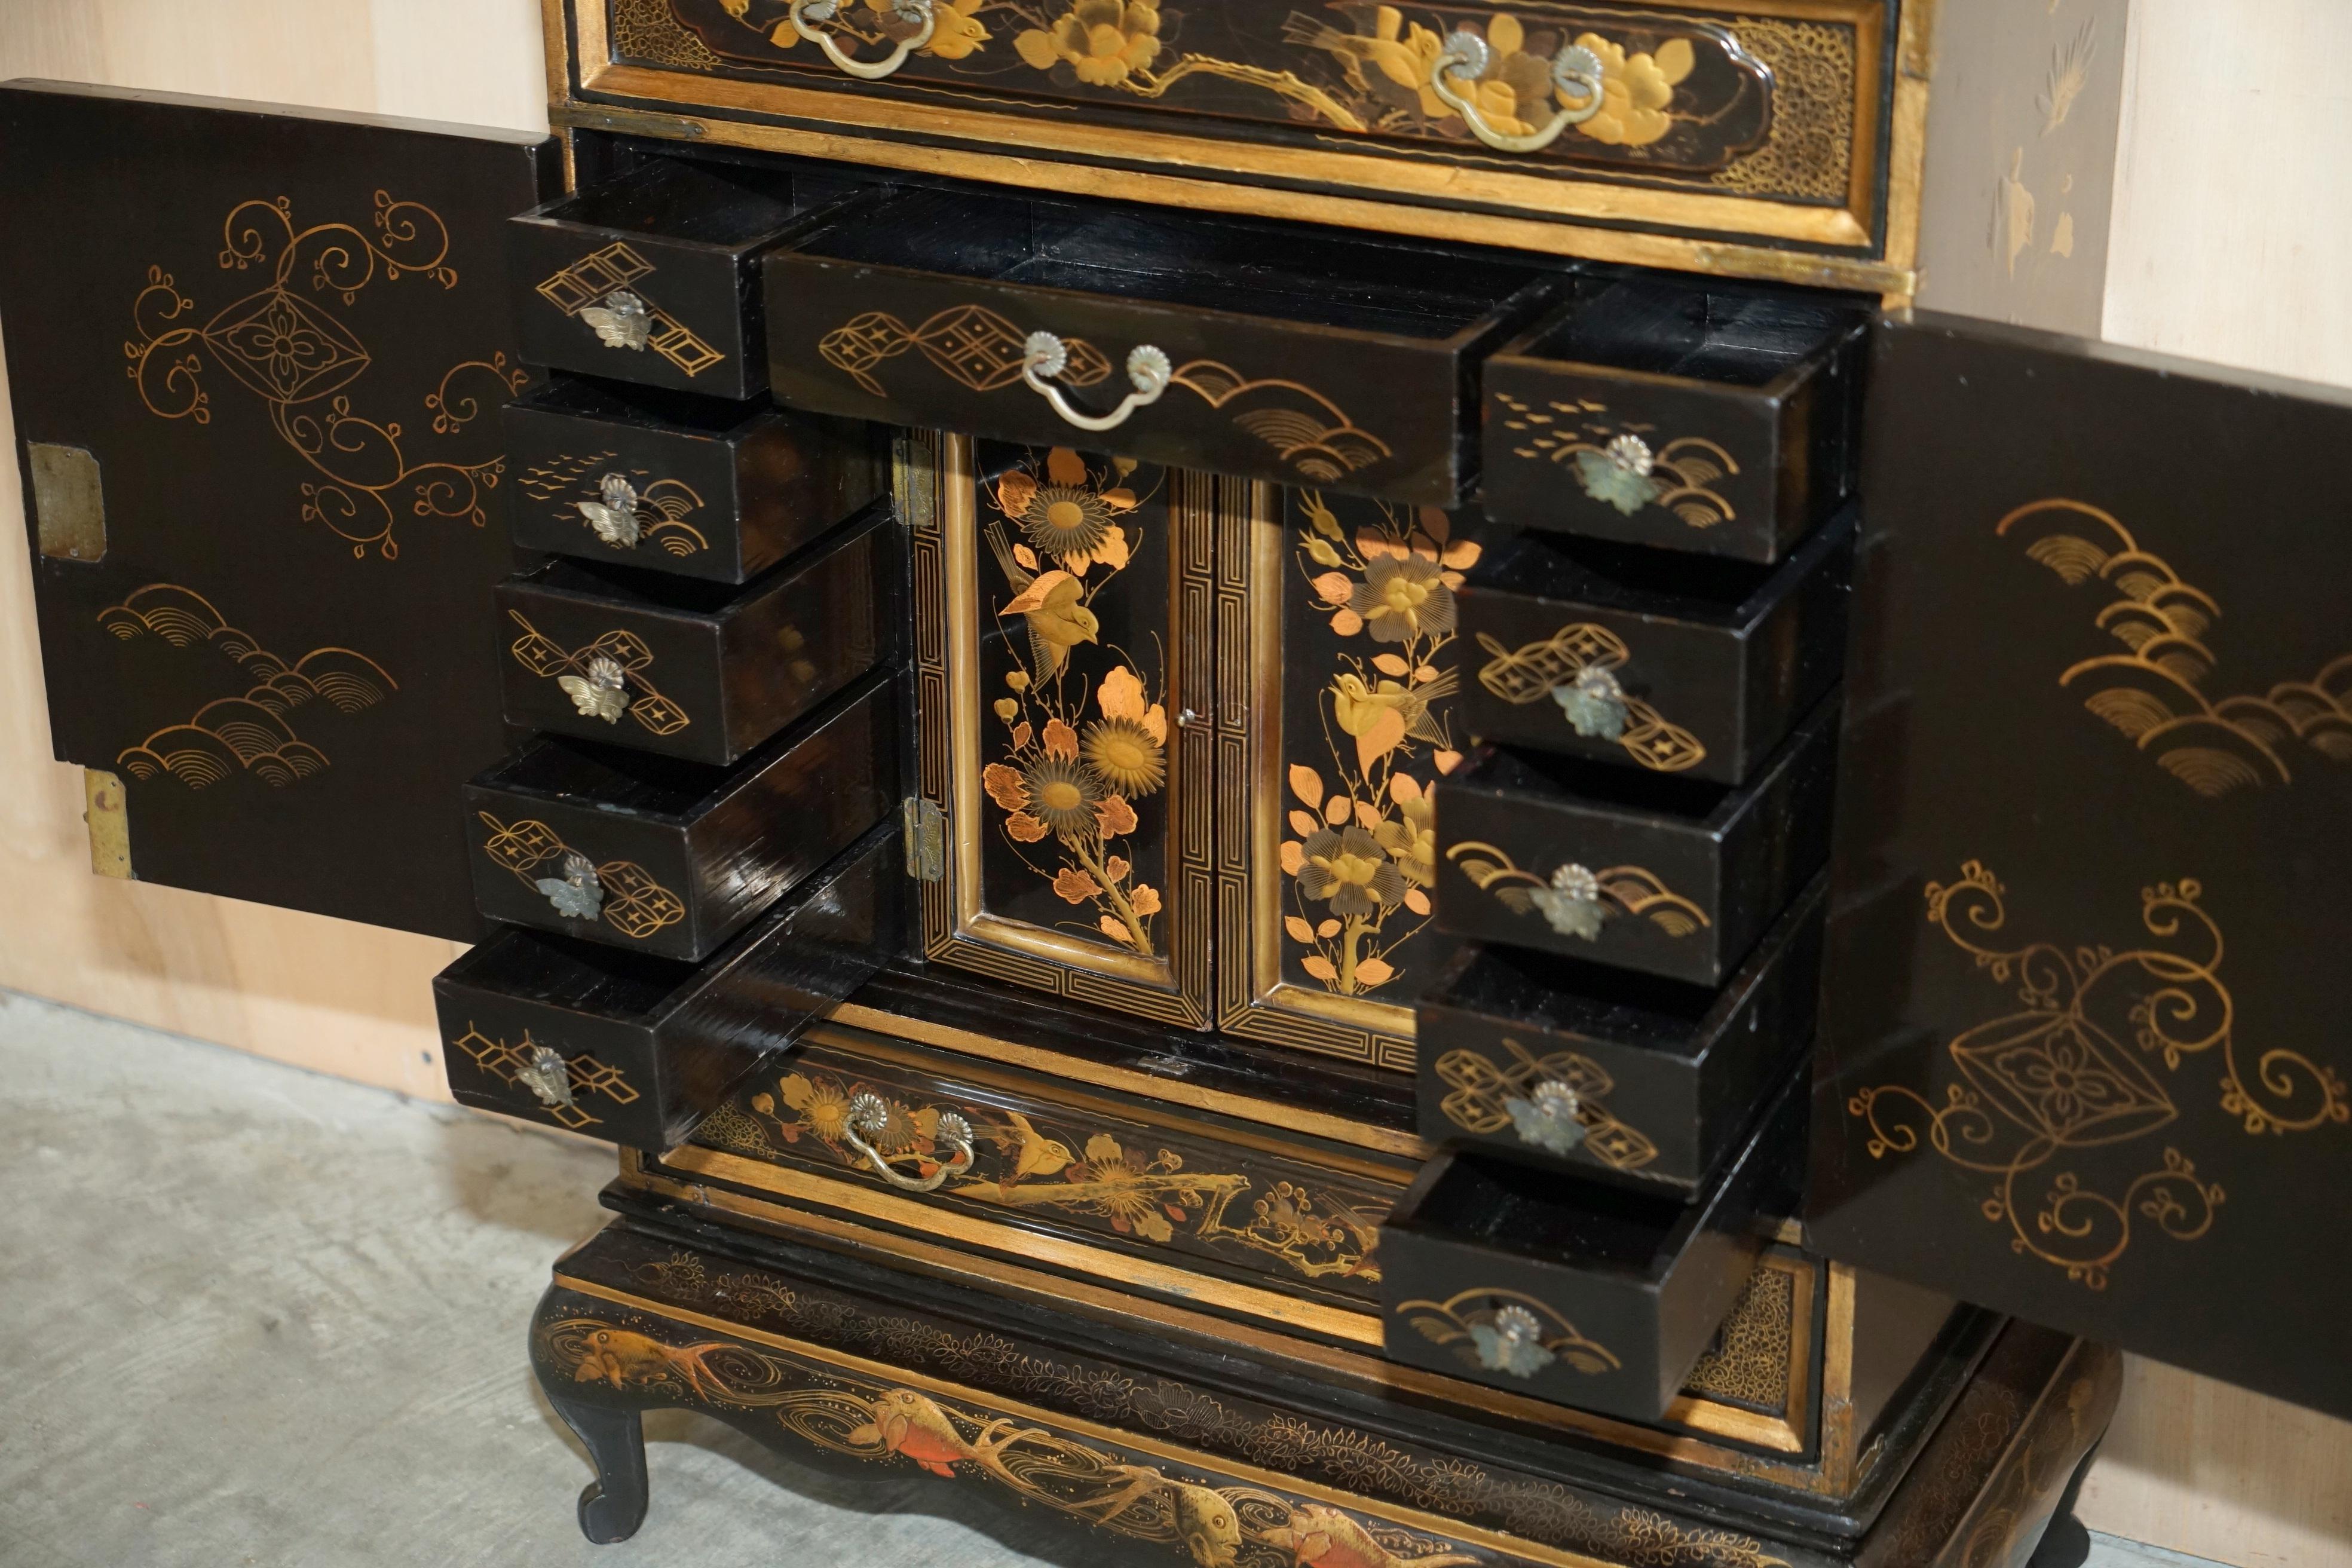 Rare Oriental Chinese Export Antique Cabinet Lots of Drawers for Fine Teas 13